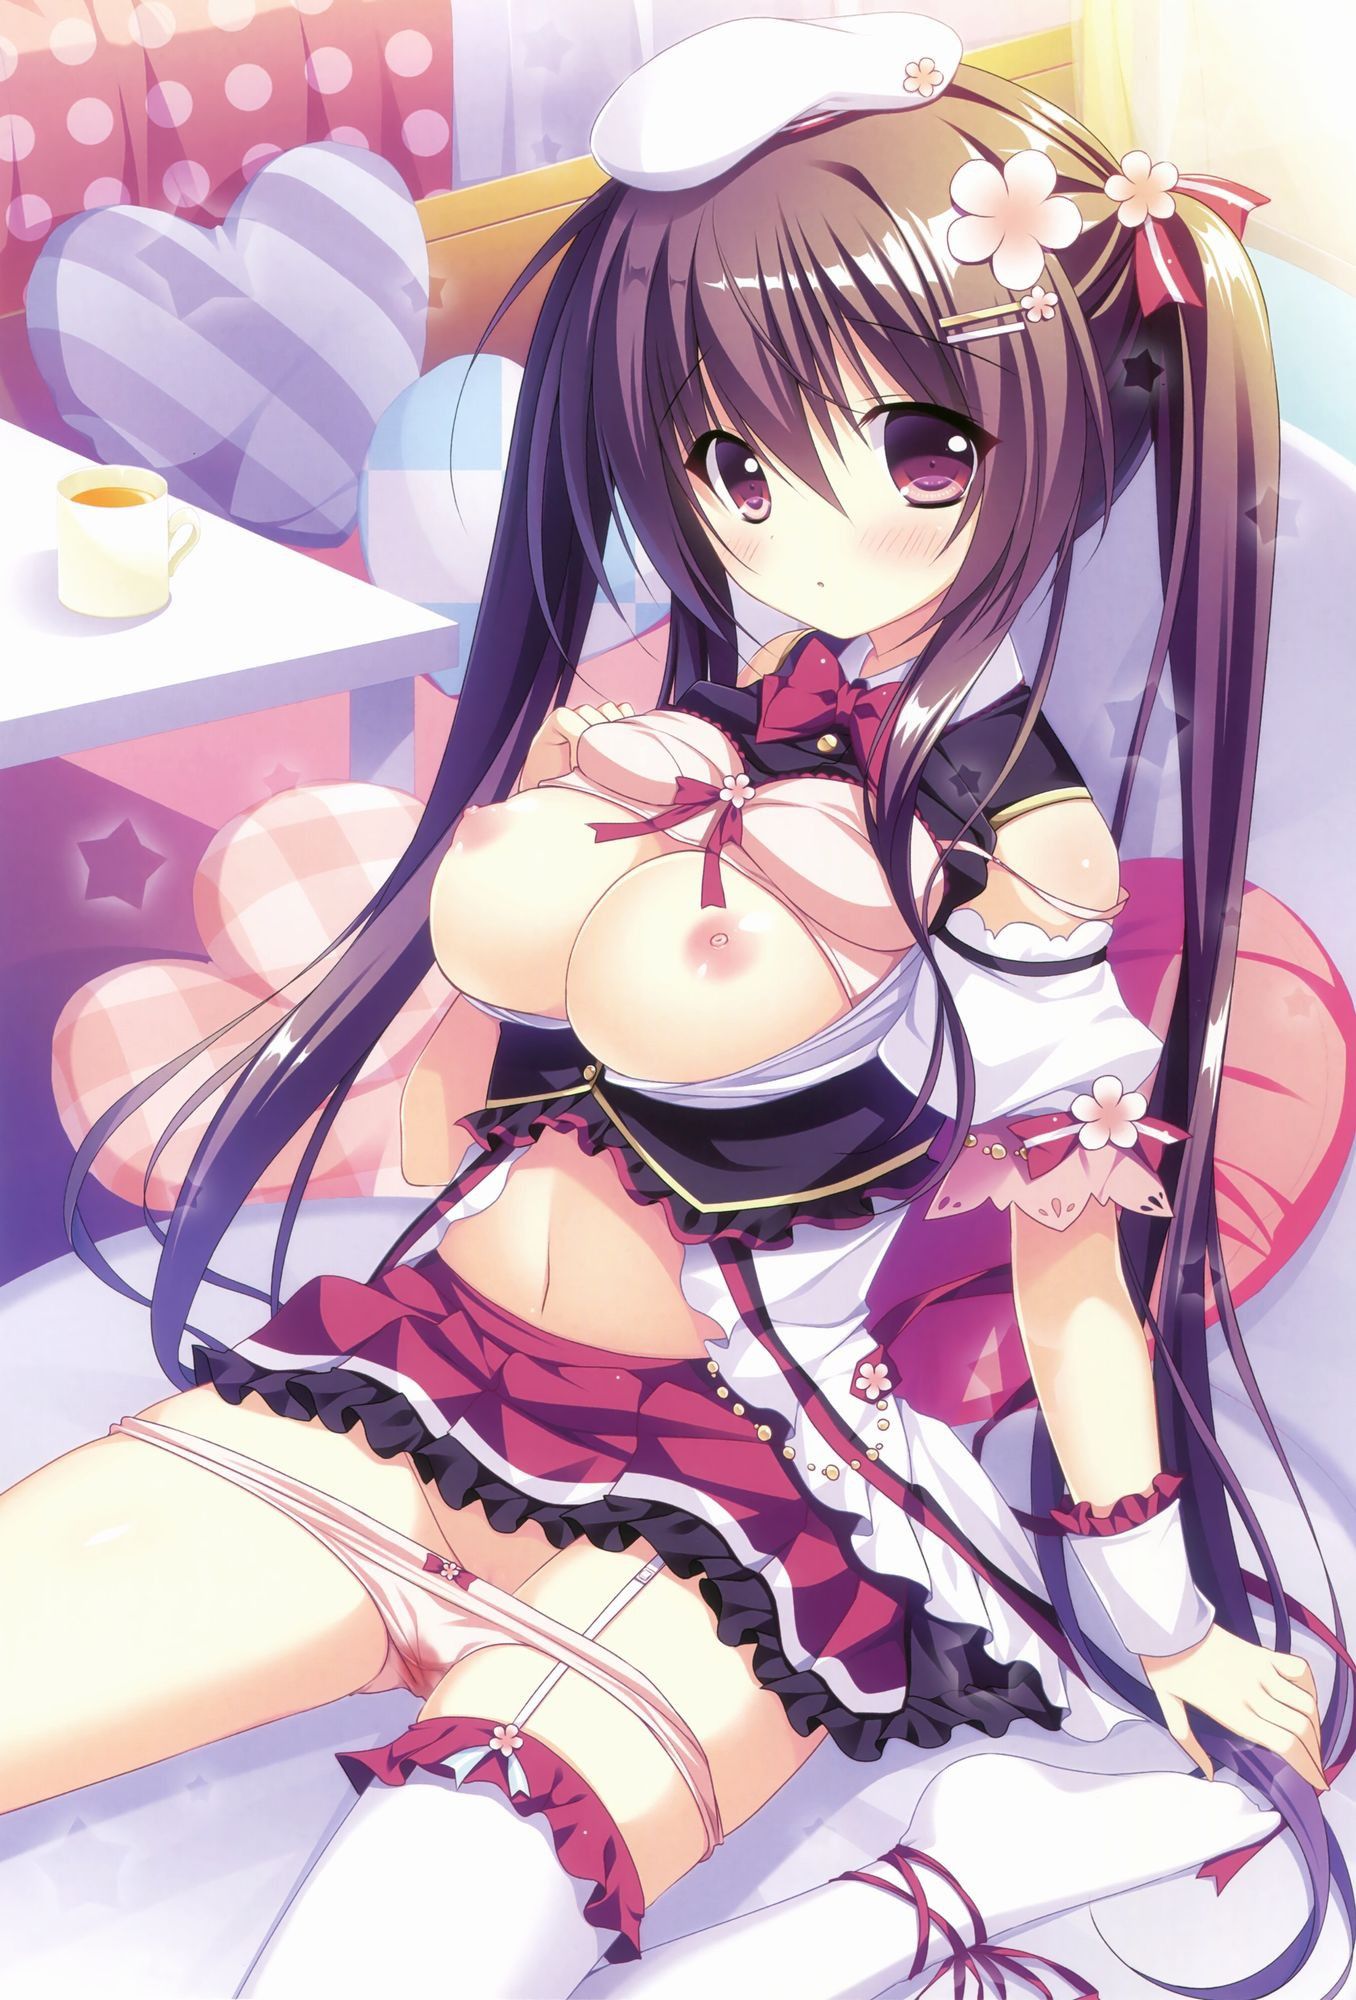 Secondary erotic erotic image of the body of the girl of twin tail is here 7